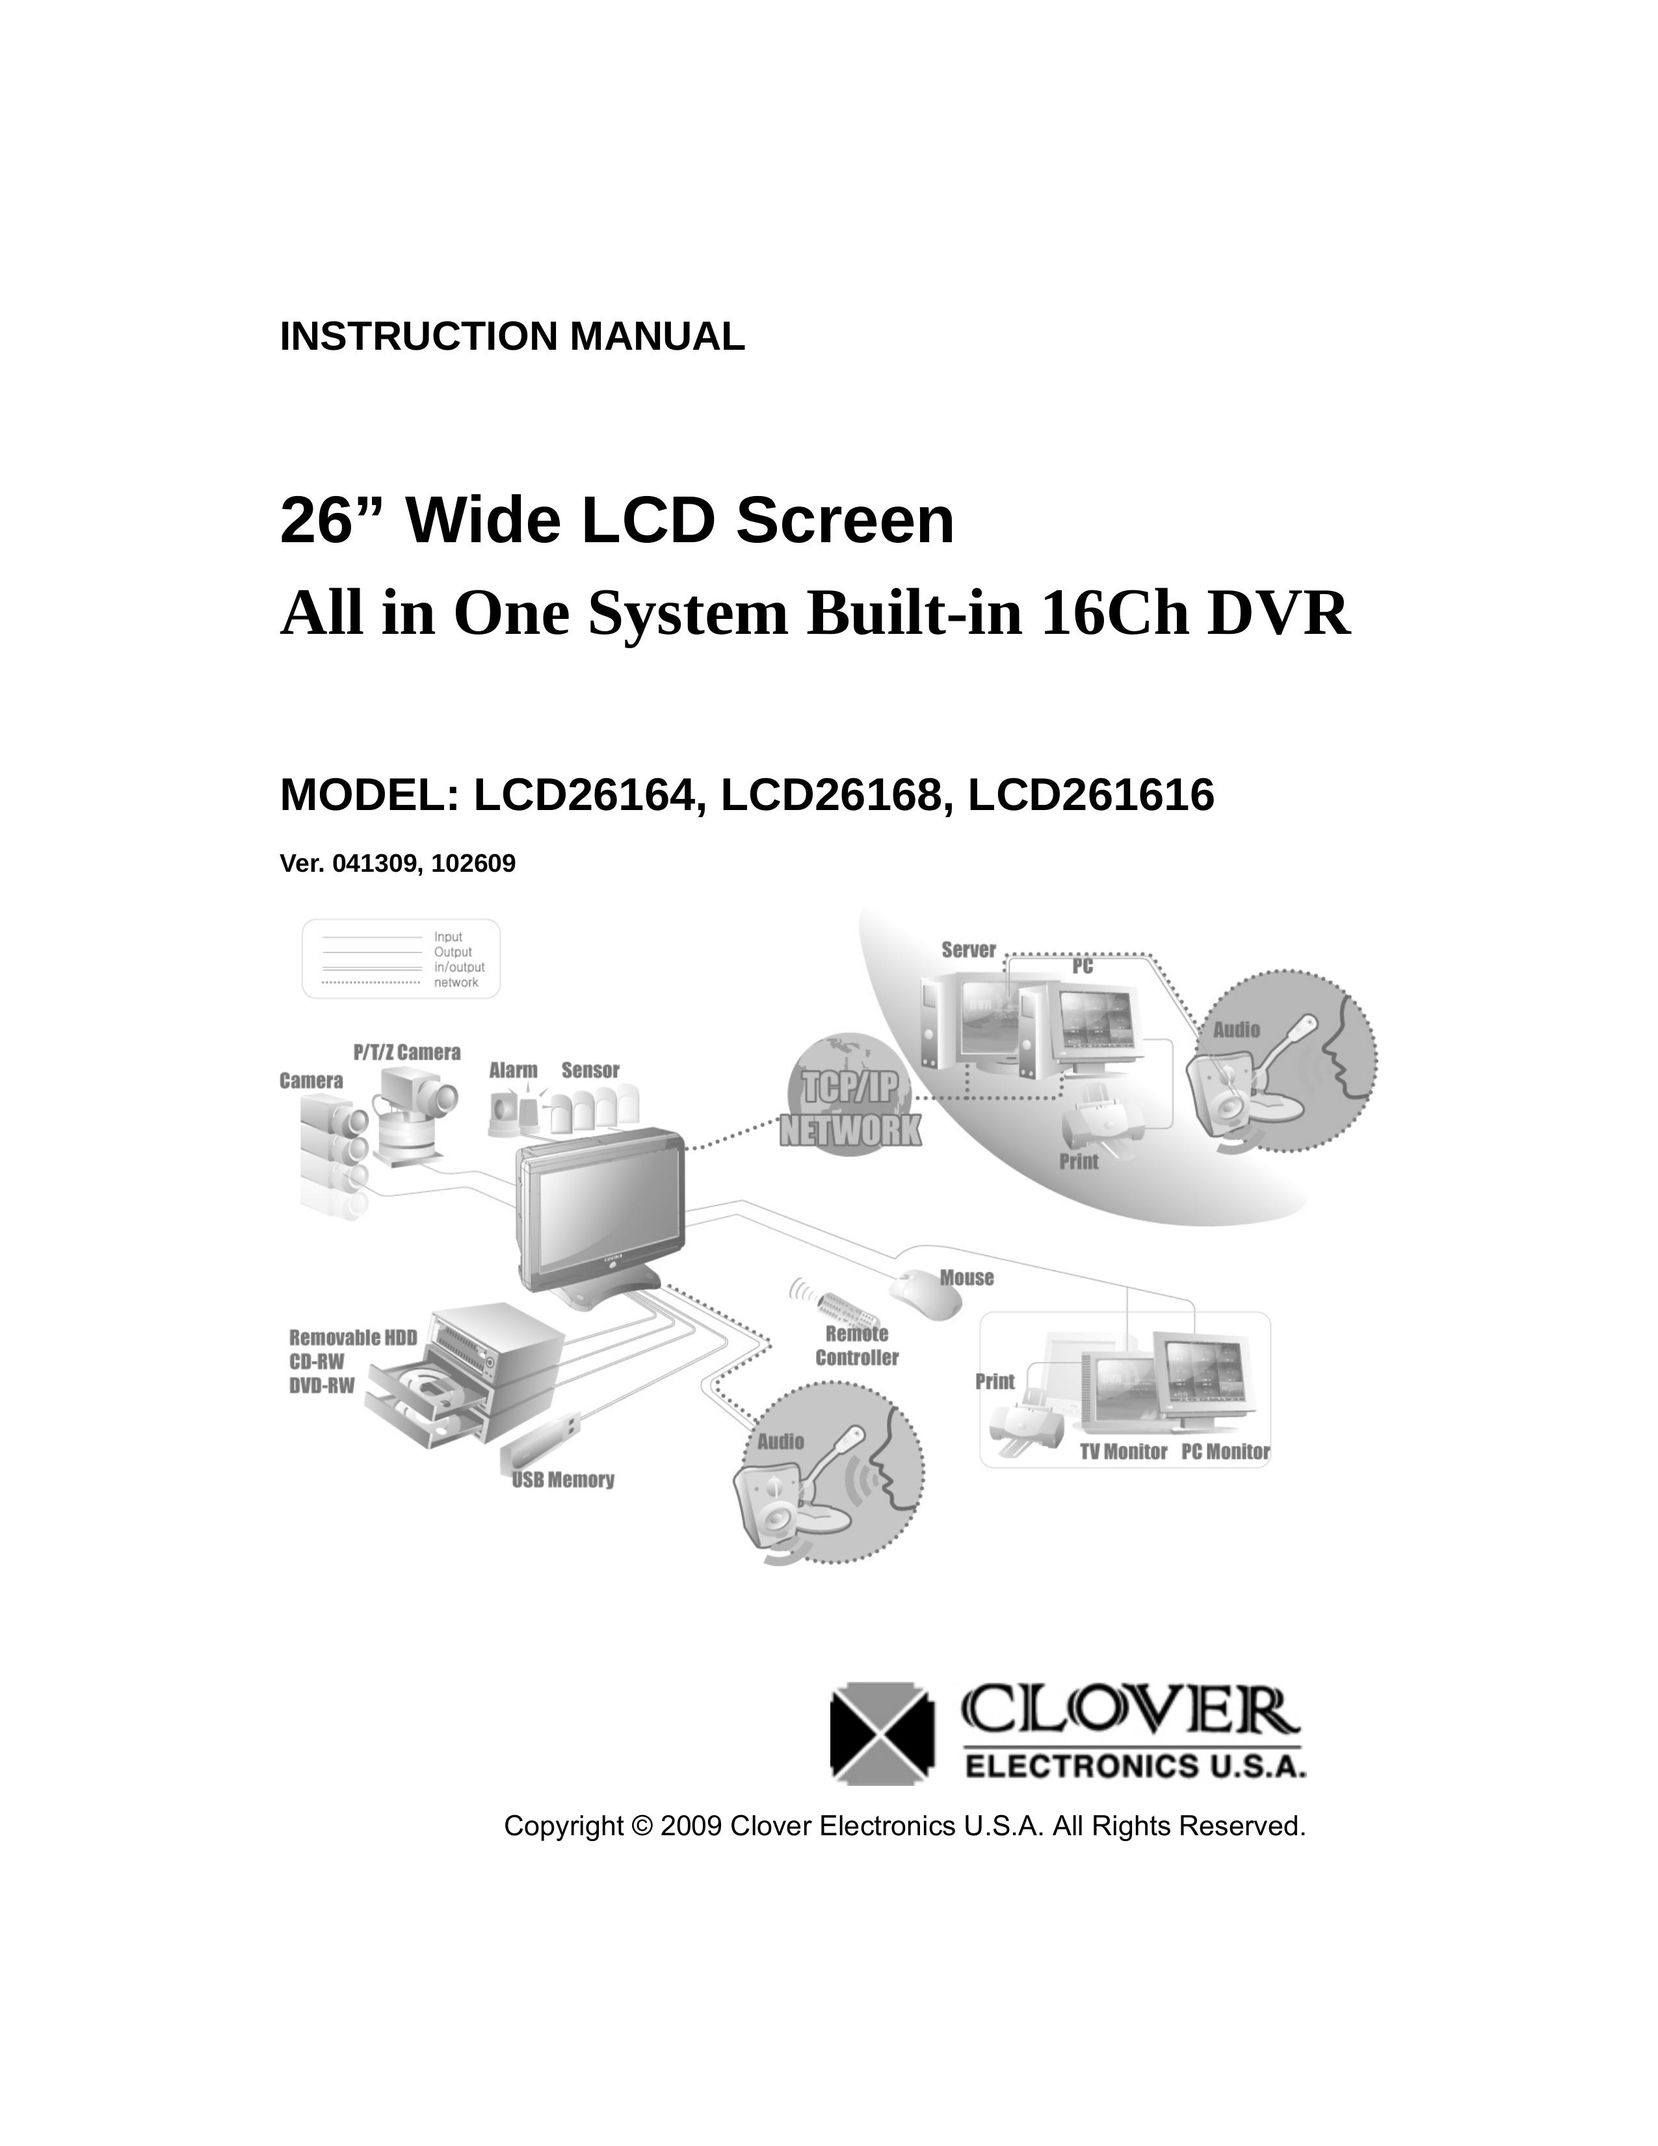 Clover Electronics LCD26168 Computer Monitor User Manual